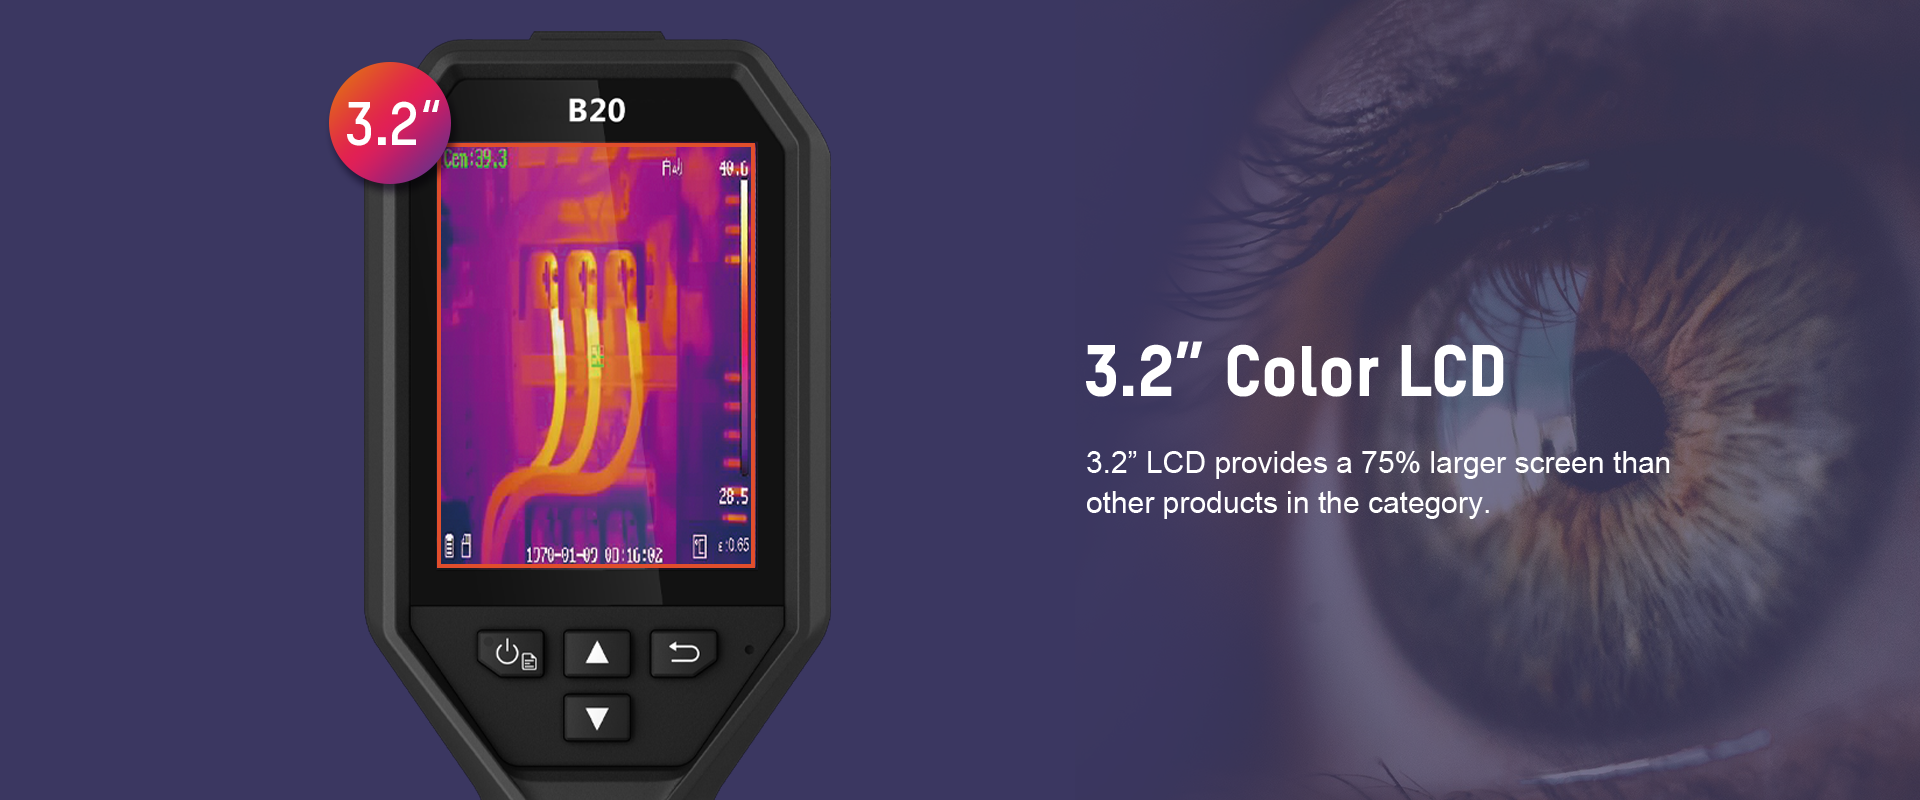 04-3.2” Color LCD.png